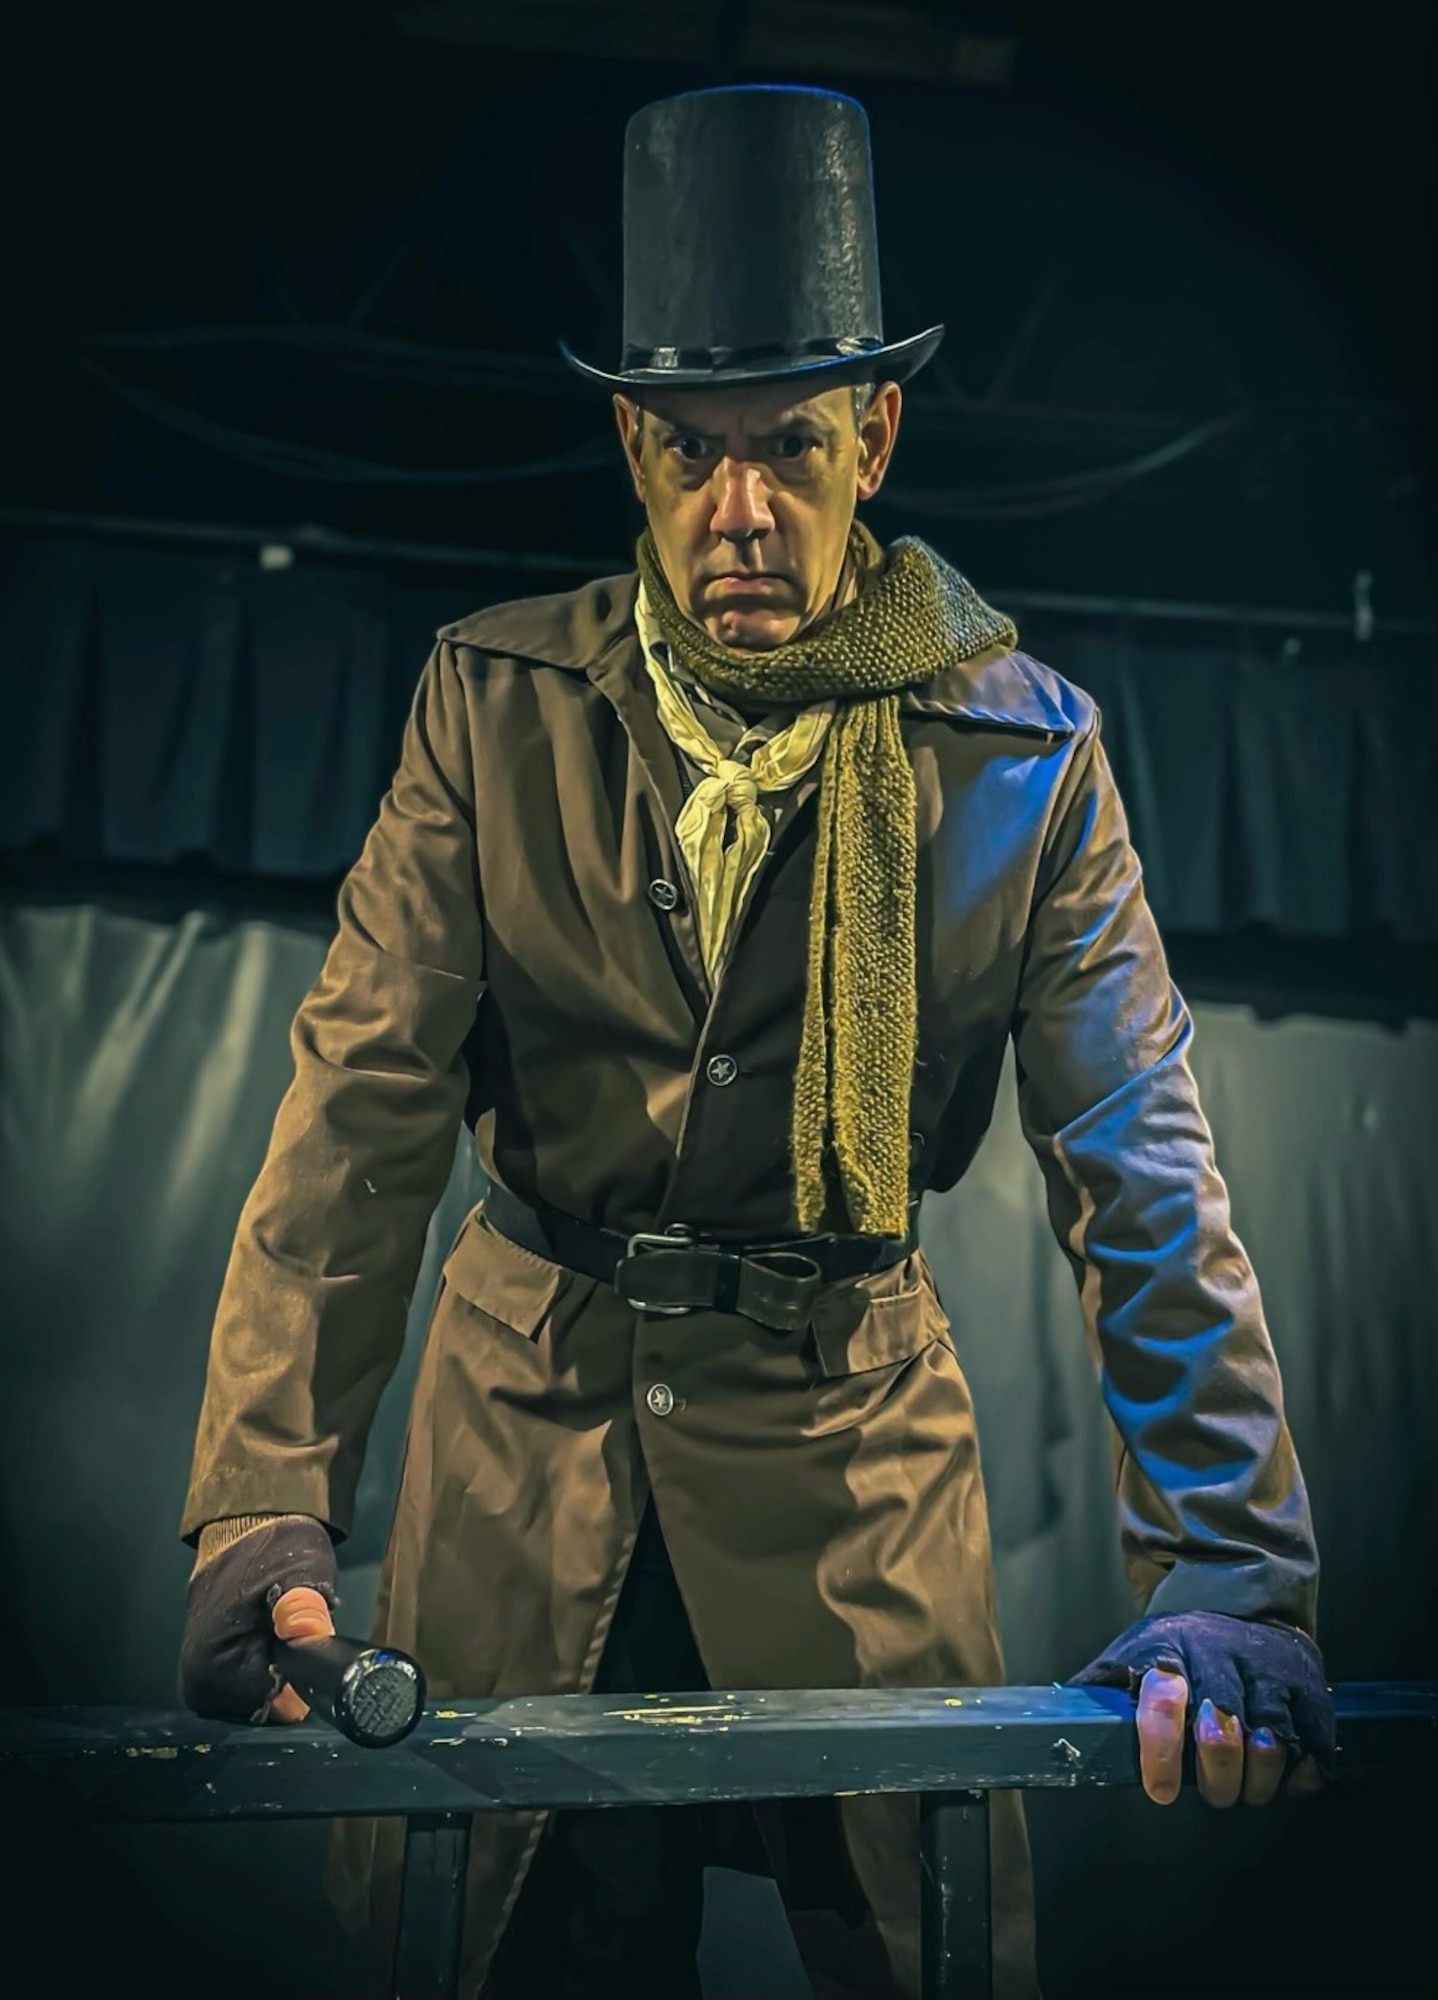 Pictured in full costume, Frank Wonder, Arnold Engineering Development Complex team member, portrays his character Bill Sikes, the main antagonist in the musical “Oliver!” during a rehearsal in January at the Manchester Arts Center in Manchester, Tennessee.